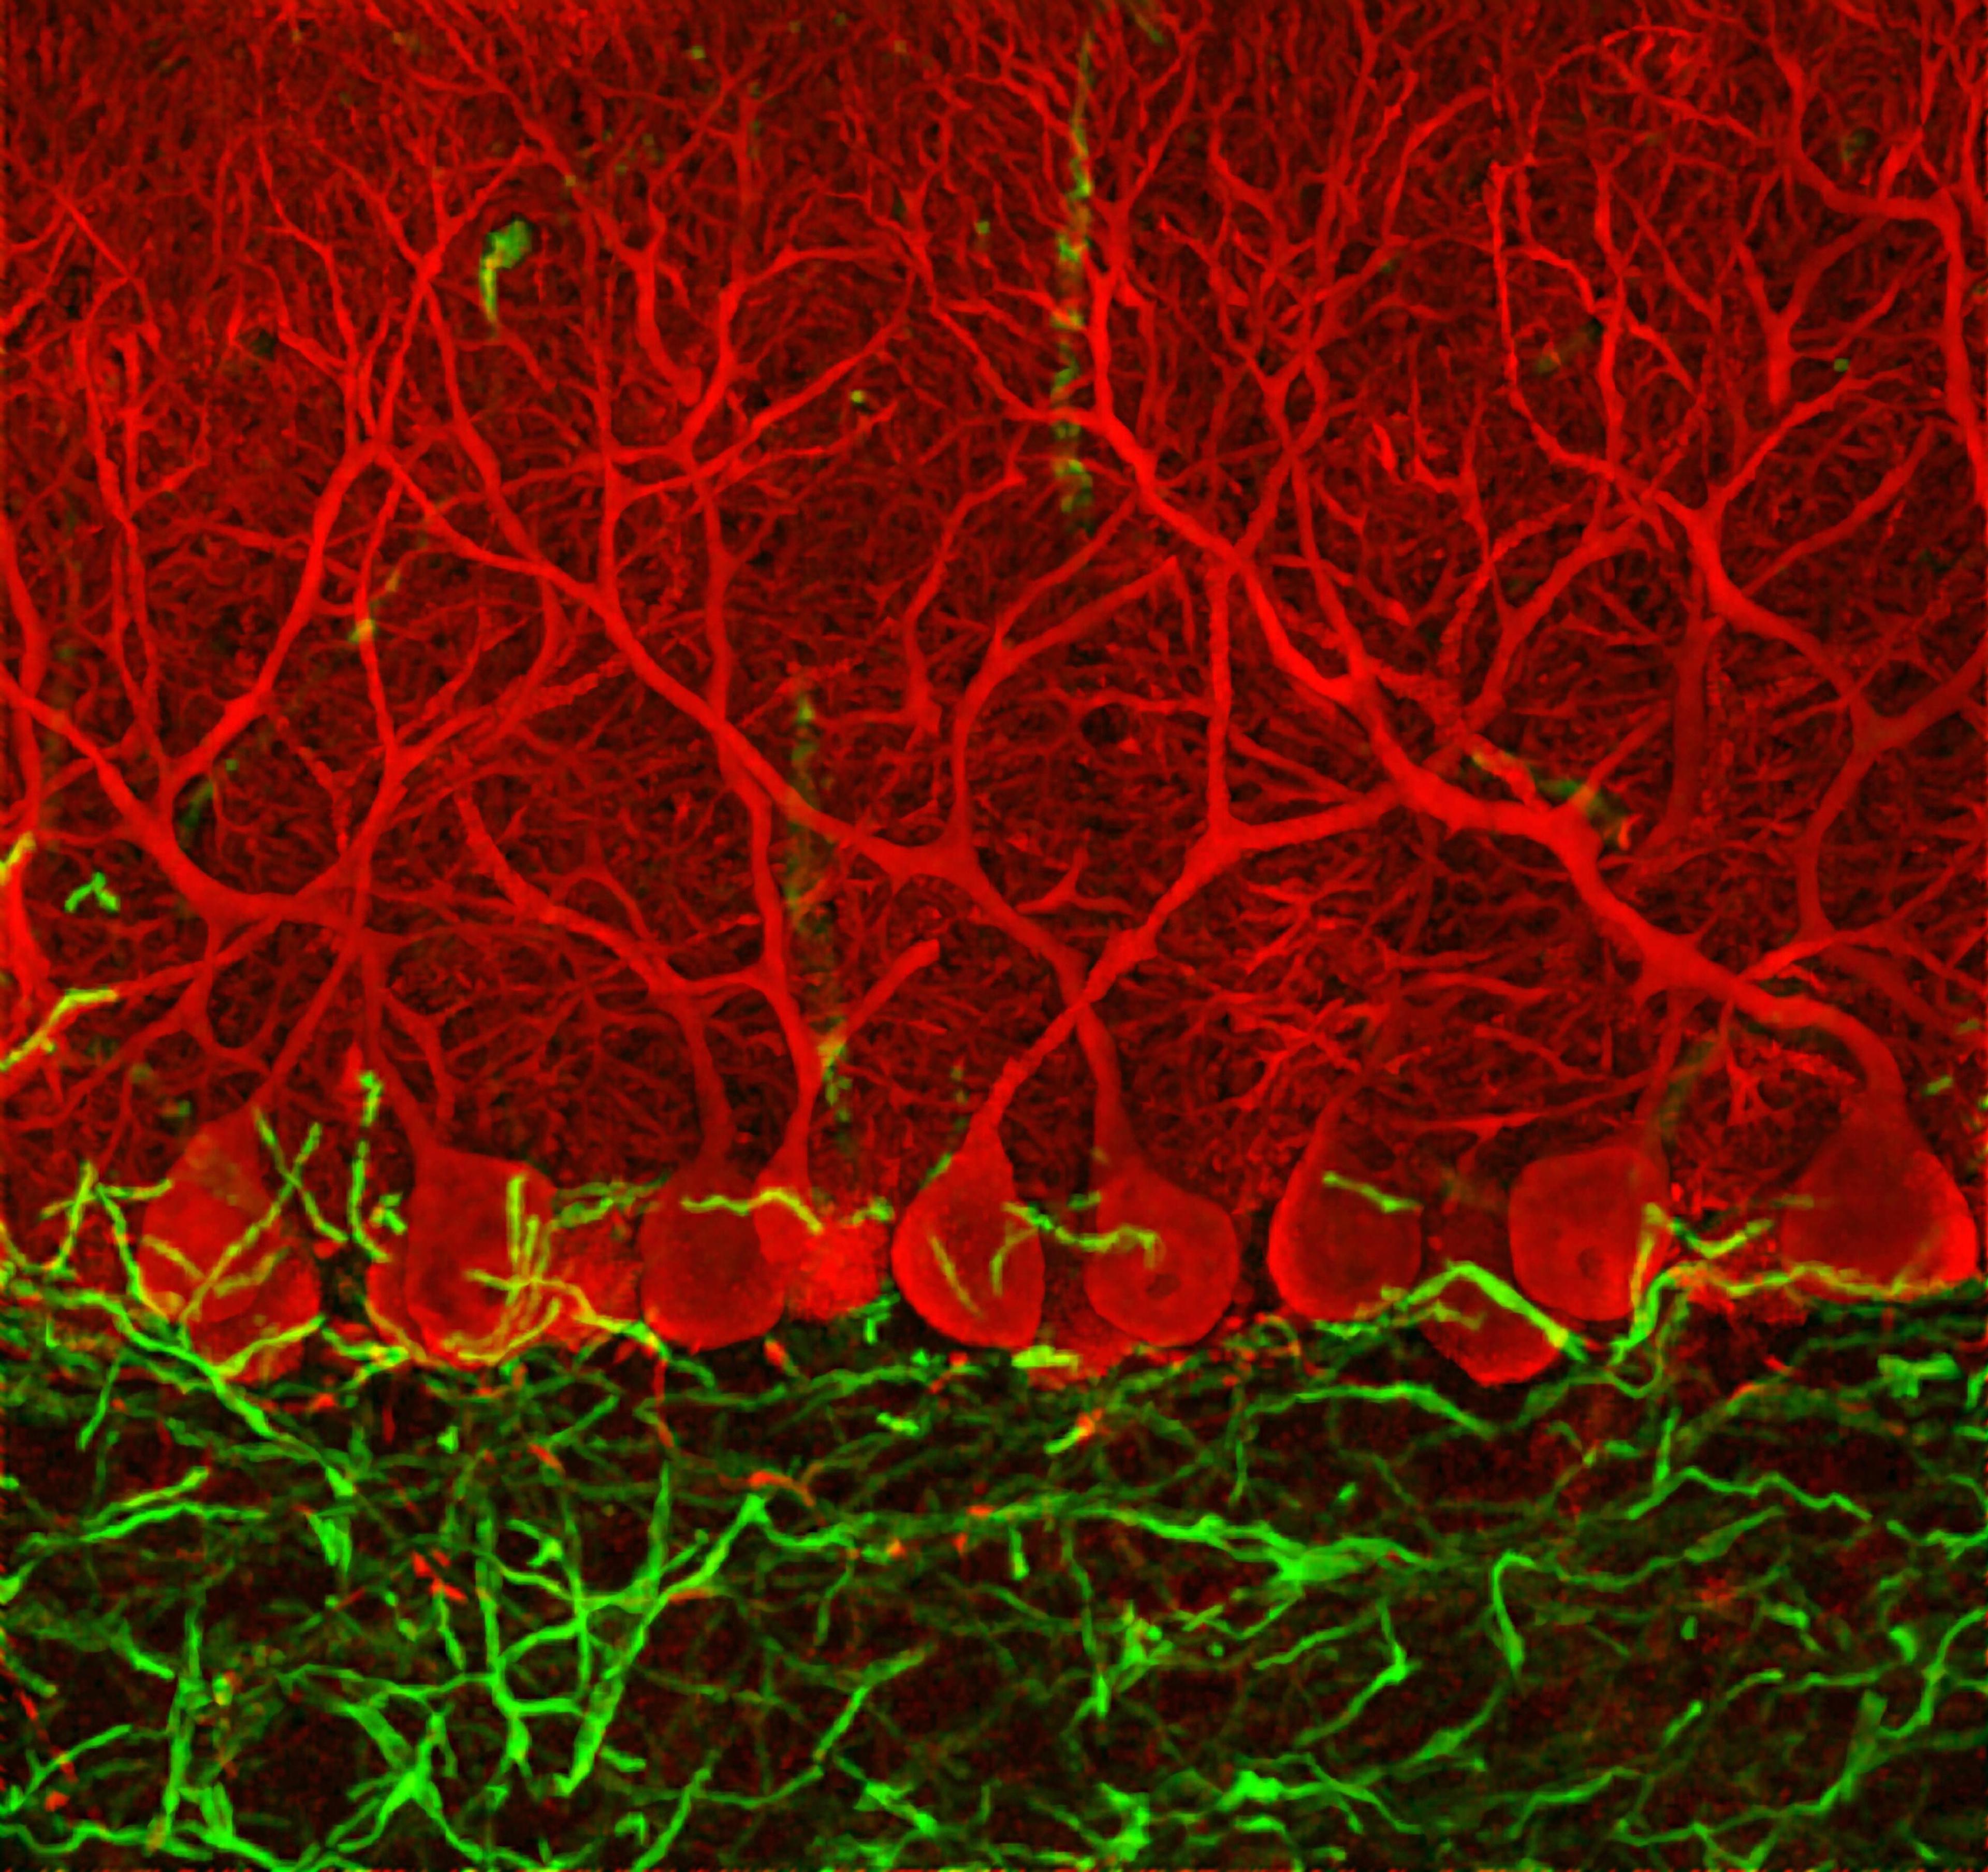 Purkinje cells (red) of the cerebellum, a brain region involved in voluntary movement, are easy to recognize because of their elaborate branches. The cells degenerate in spinocerebellar ataxia 1 (SCA1), an inherited disease caused by mutations in the ATXN1 gene. Harry Orr and Huda Zoghbi independently discovered the gene in 1993. As collaborators, they have worked out how the mutations lead to the degeneration of Purkinje cells in people with SCA1. Credit: Ludovic Collin. Attribution-NonCommercial 4.0 International (CC BY-NC 4.0)